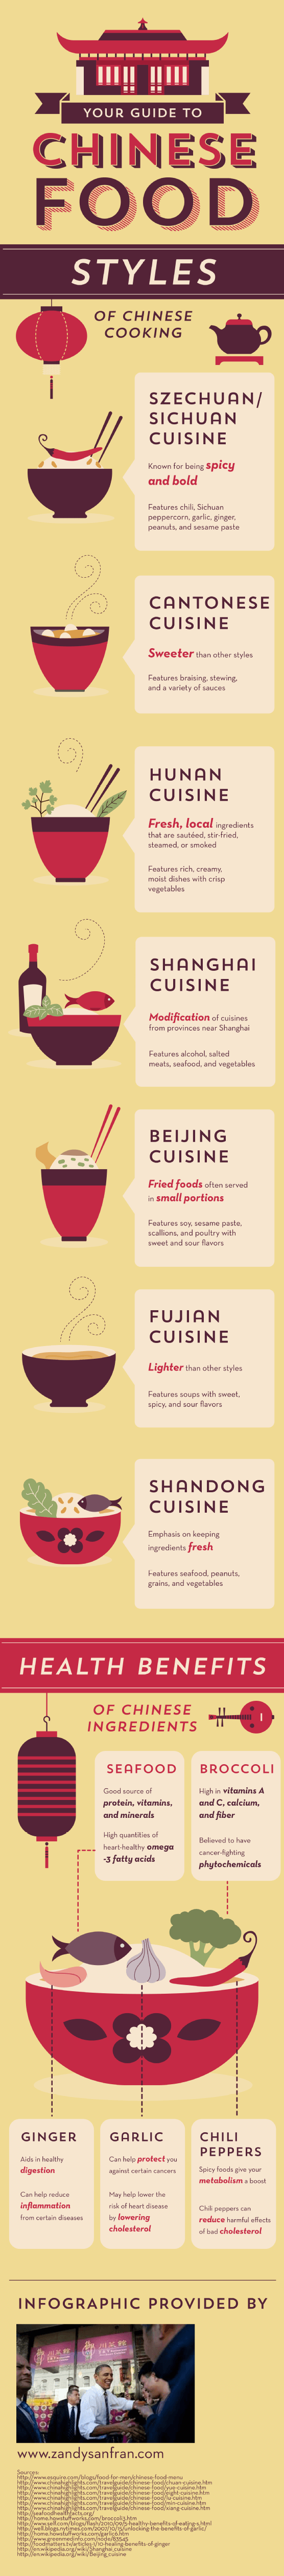 Chinese-Food-infographic